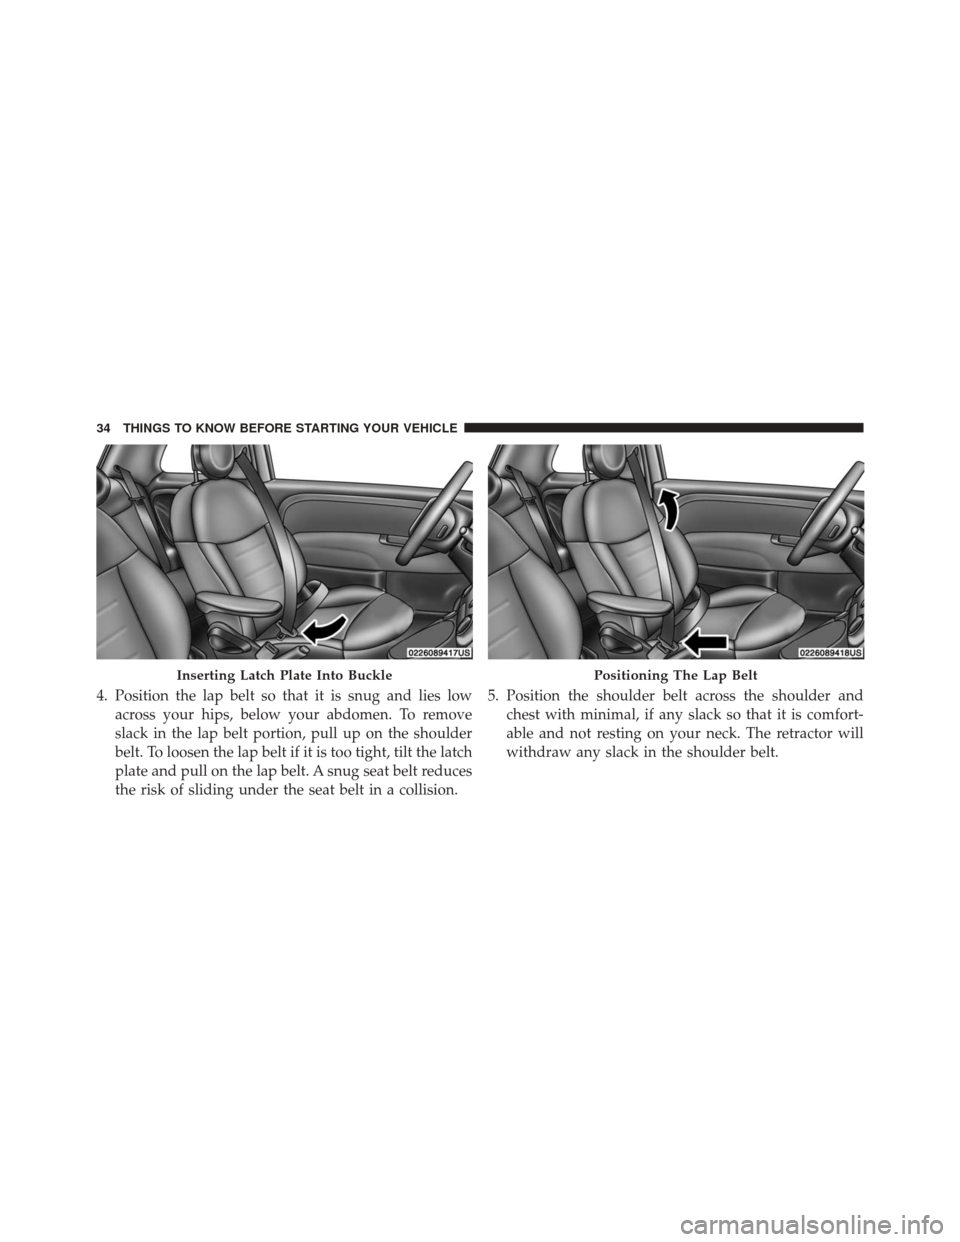 FIAT 500 2016 2.G Owners Guide 4. Position the lap belt so that it is snug and lies lowacross your hips, below your abdomen. To remove
slack in the lap belt portion, pull up on the shoulder
belt. To loosen the lap belt if it is too